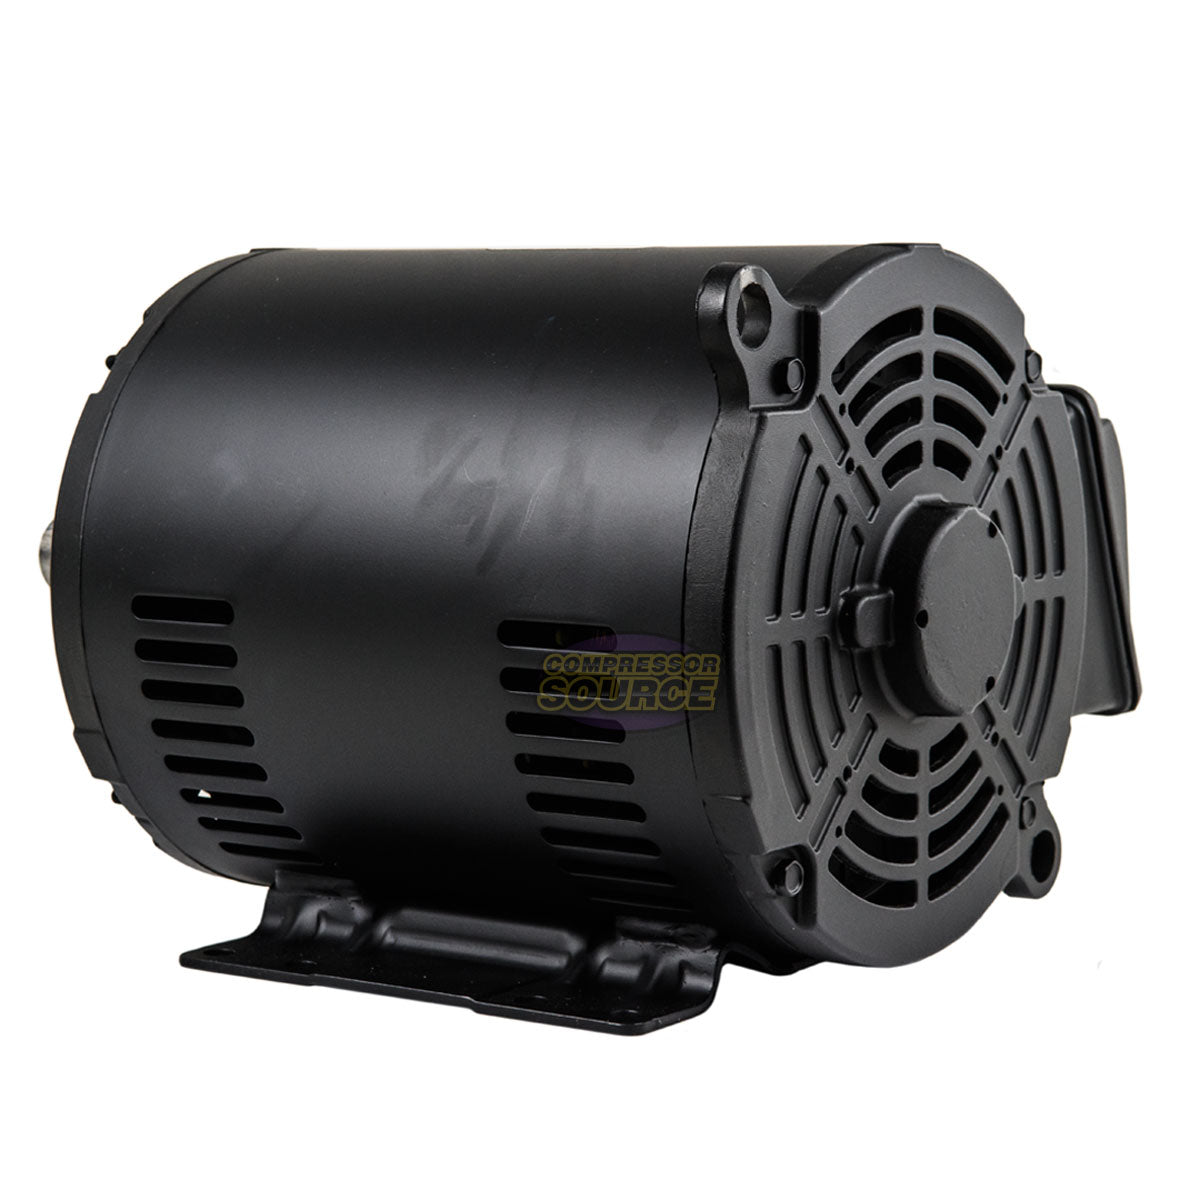 5.5kw/7.5hp 1400 rpm Electric motor three phase Frame 112 compressor